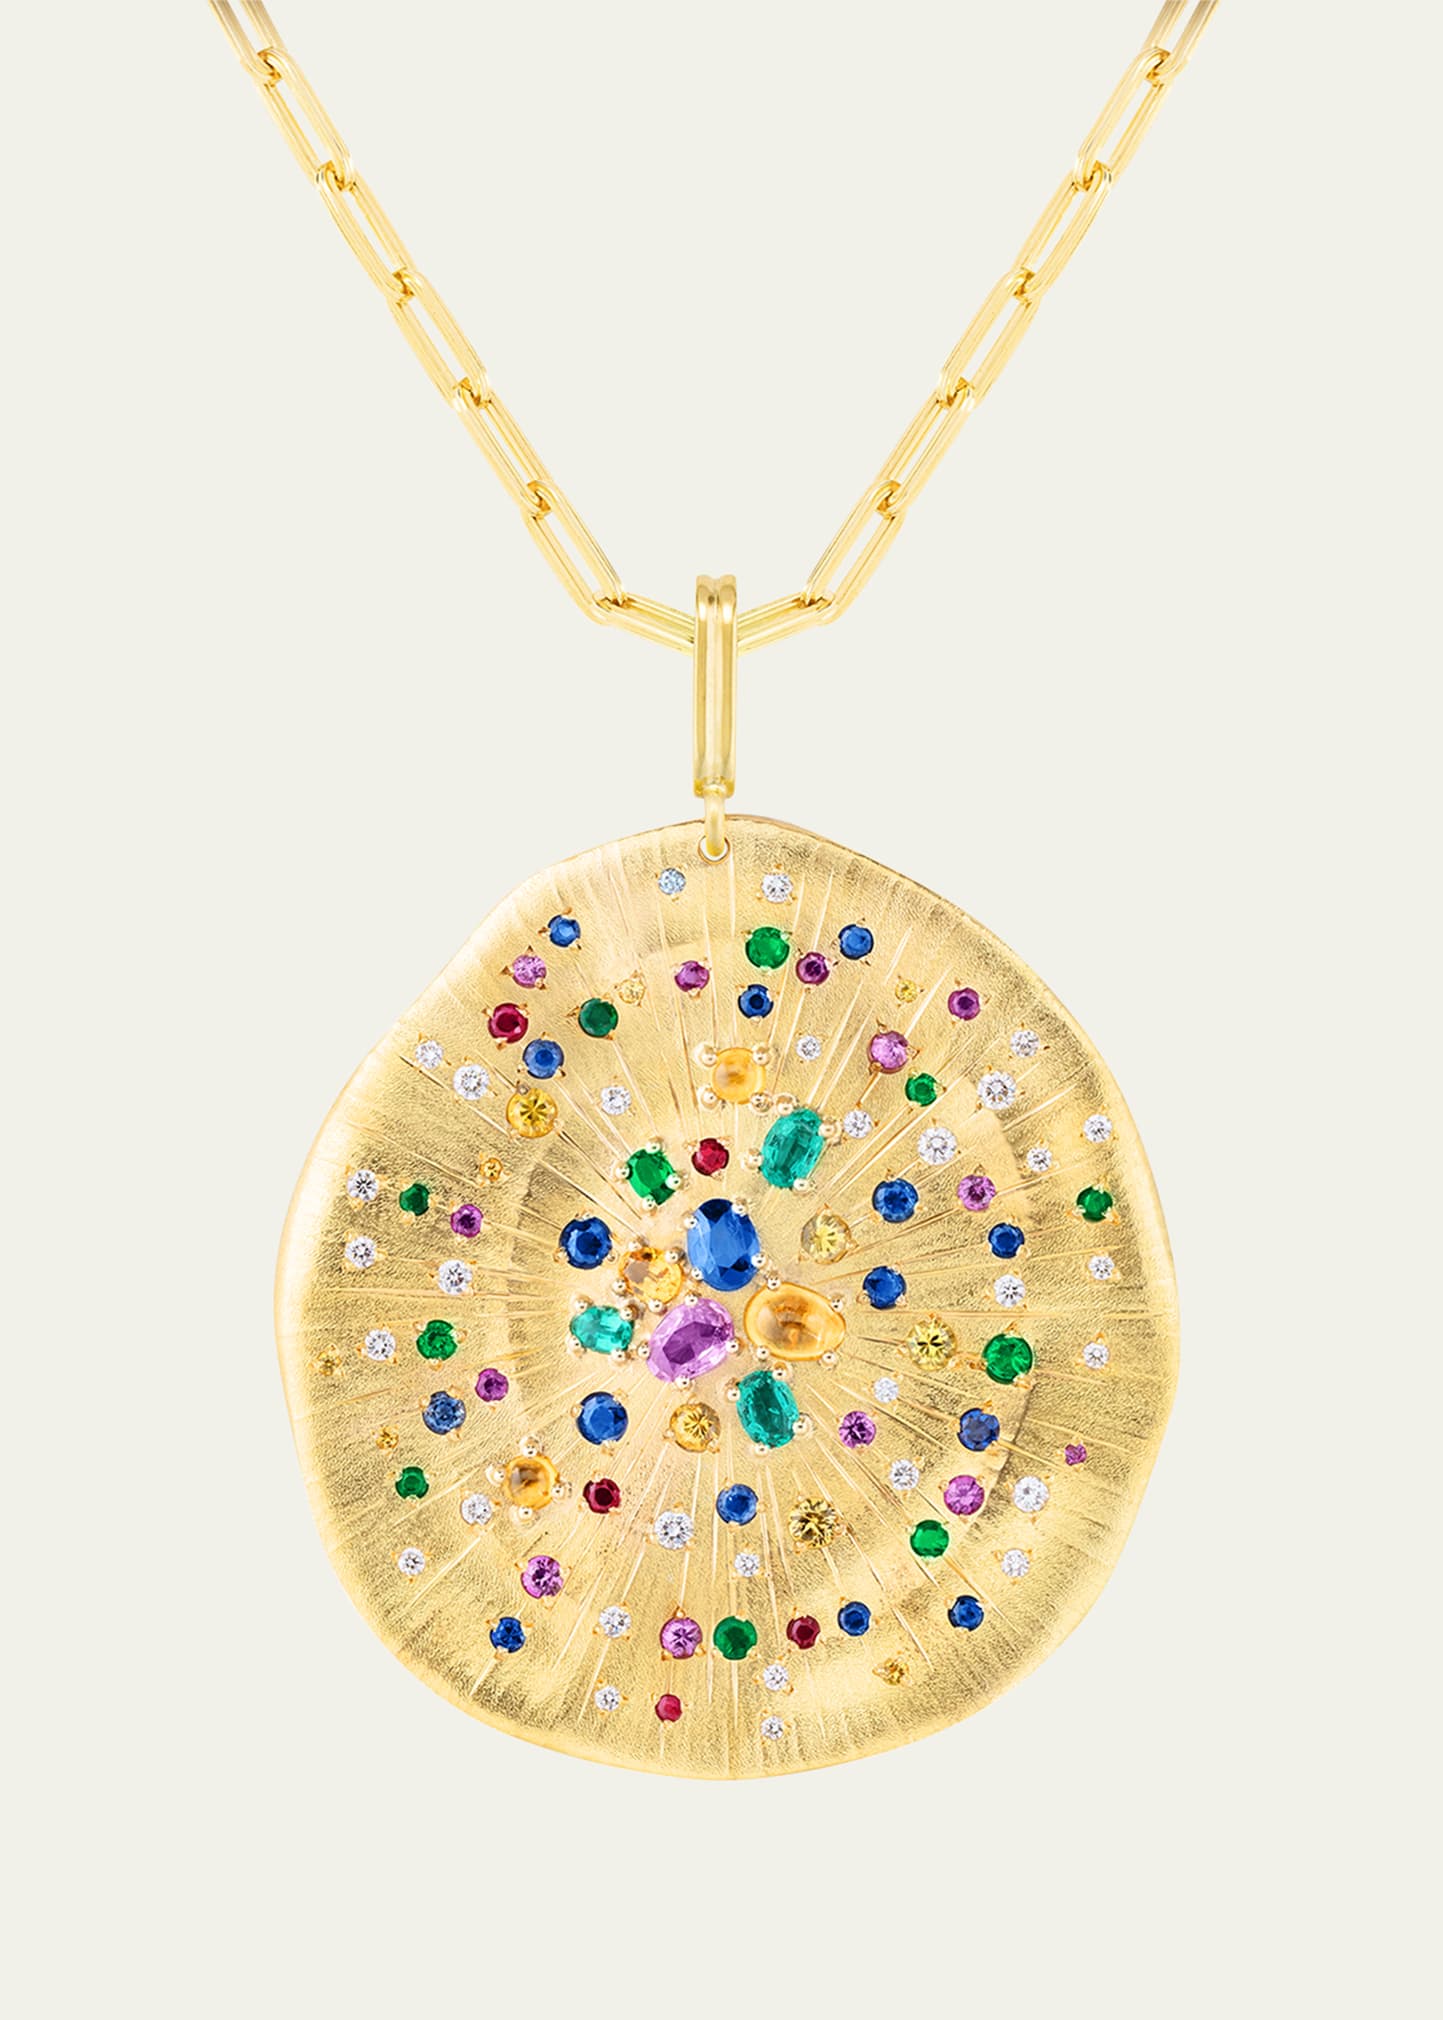 18K Yellow Gold Soleil Medal Necklace with Multicolor Sapphires, Emeralds, Rubies and Diamonds